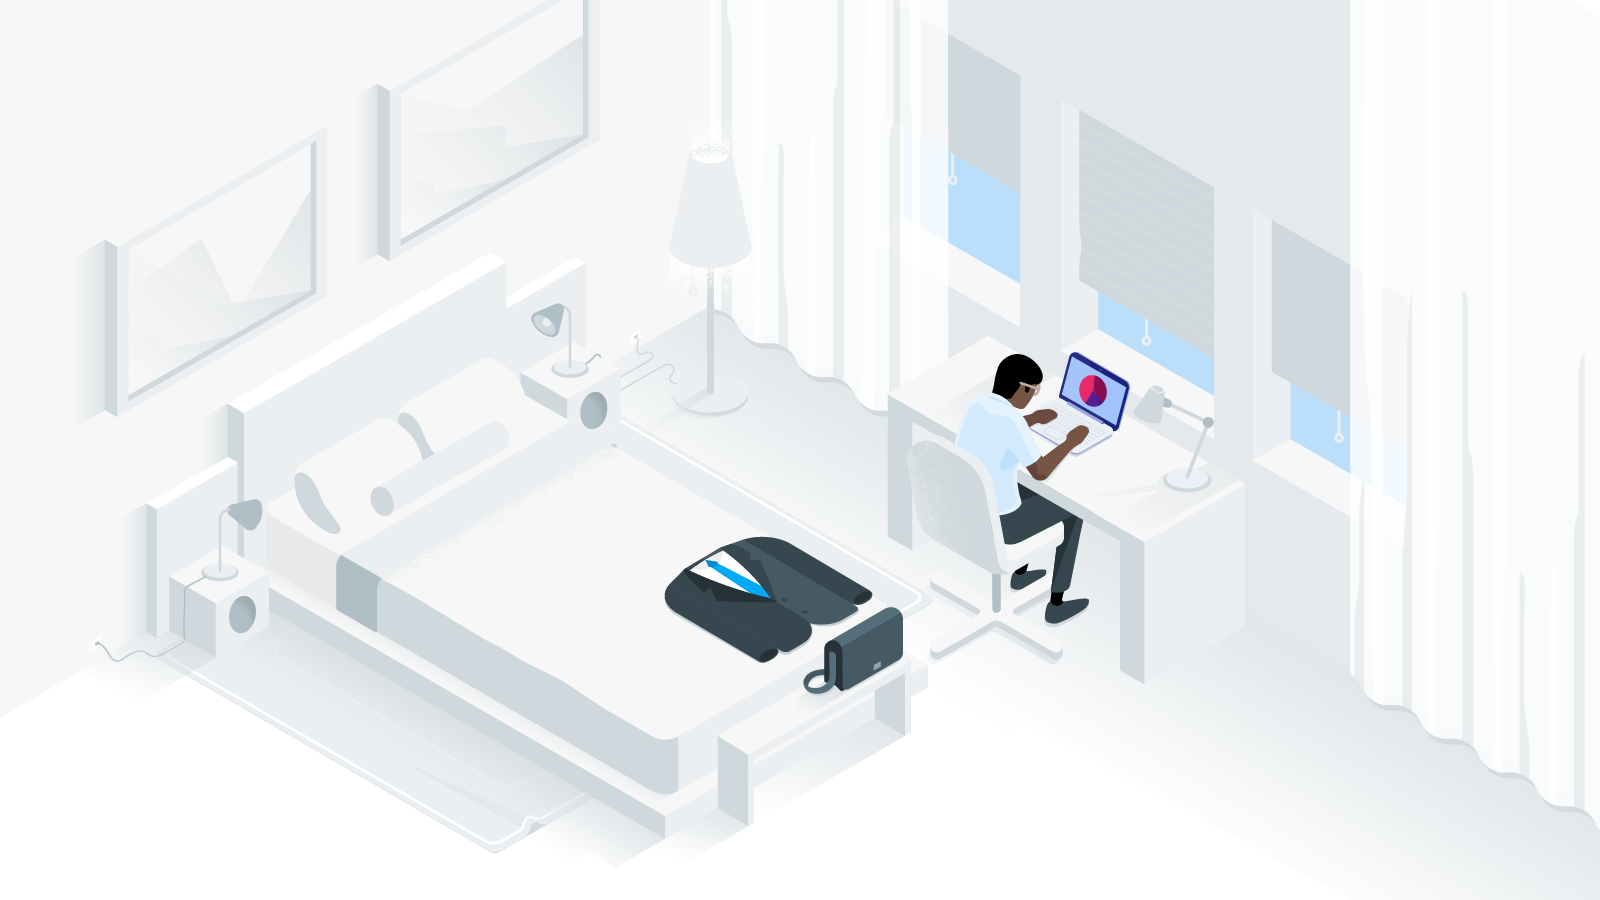 Illustrations for Google Hotel Reviews